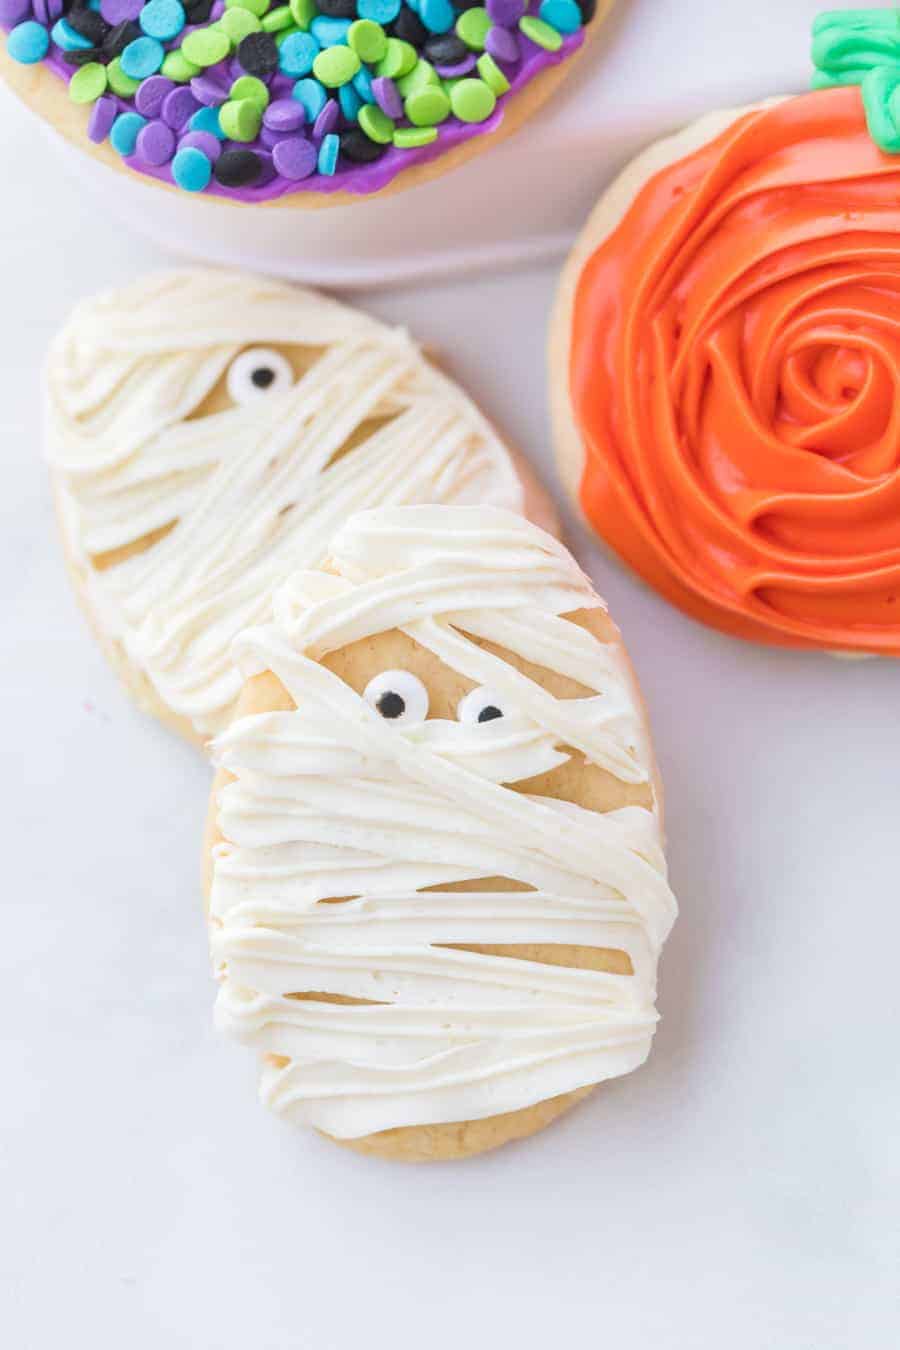 Halloween sugar cookies are adorable, soft, and sweet cookies that are sure to create wonderful memories baking with your family and festive treats for this spooky holiday! As a lover of sweets, I'm of the firm belief that sugar cookies aren't just for Christmas, and candy isn't just for Halloween! Celebrate this fun (and sometimes spooky) holiday by baking a big batch of these festive sugar cookies with your loved ones this Halloween season! #sugarcookies #cookies #halloweensugarcookies